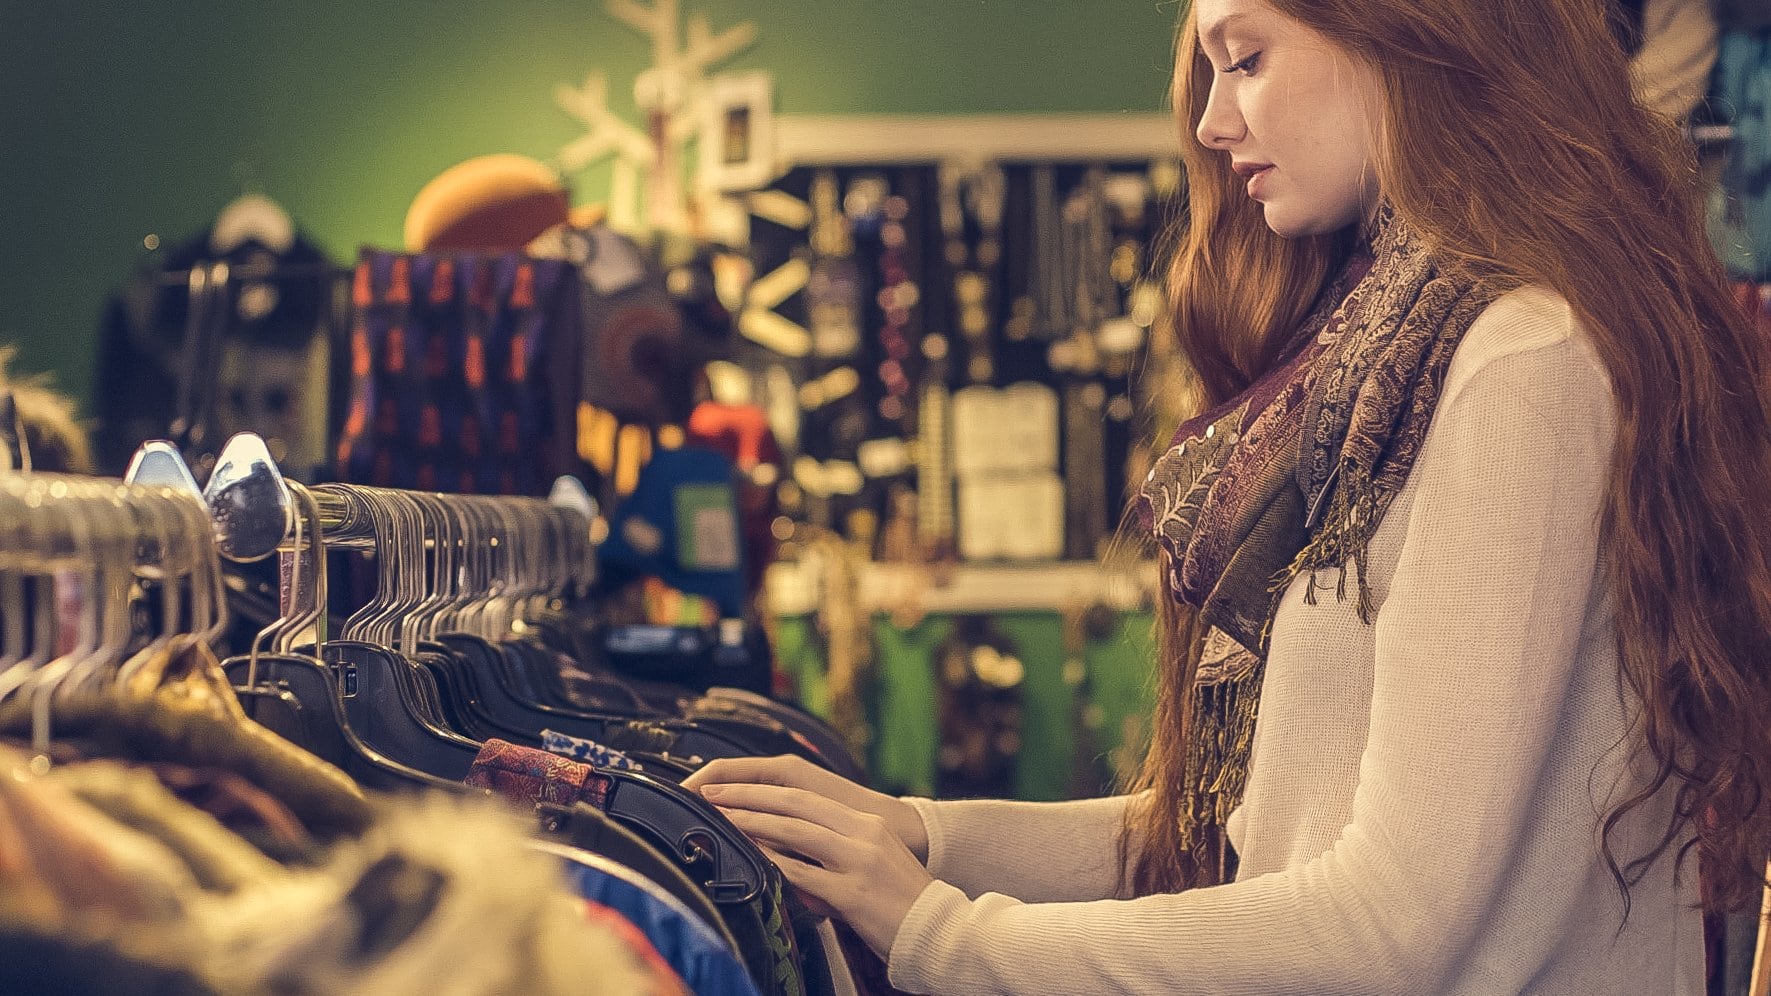 Photo of a red headed girl wearing a scarf and sweater shopping at a thrift store.